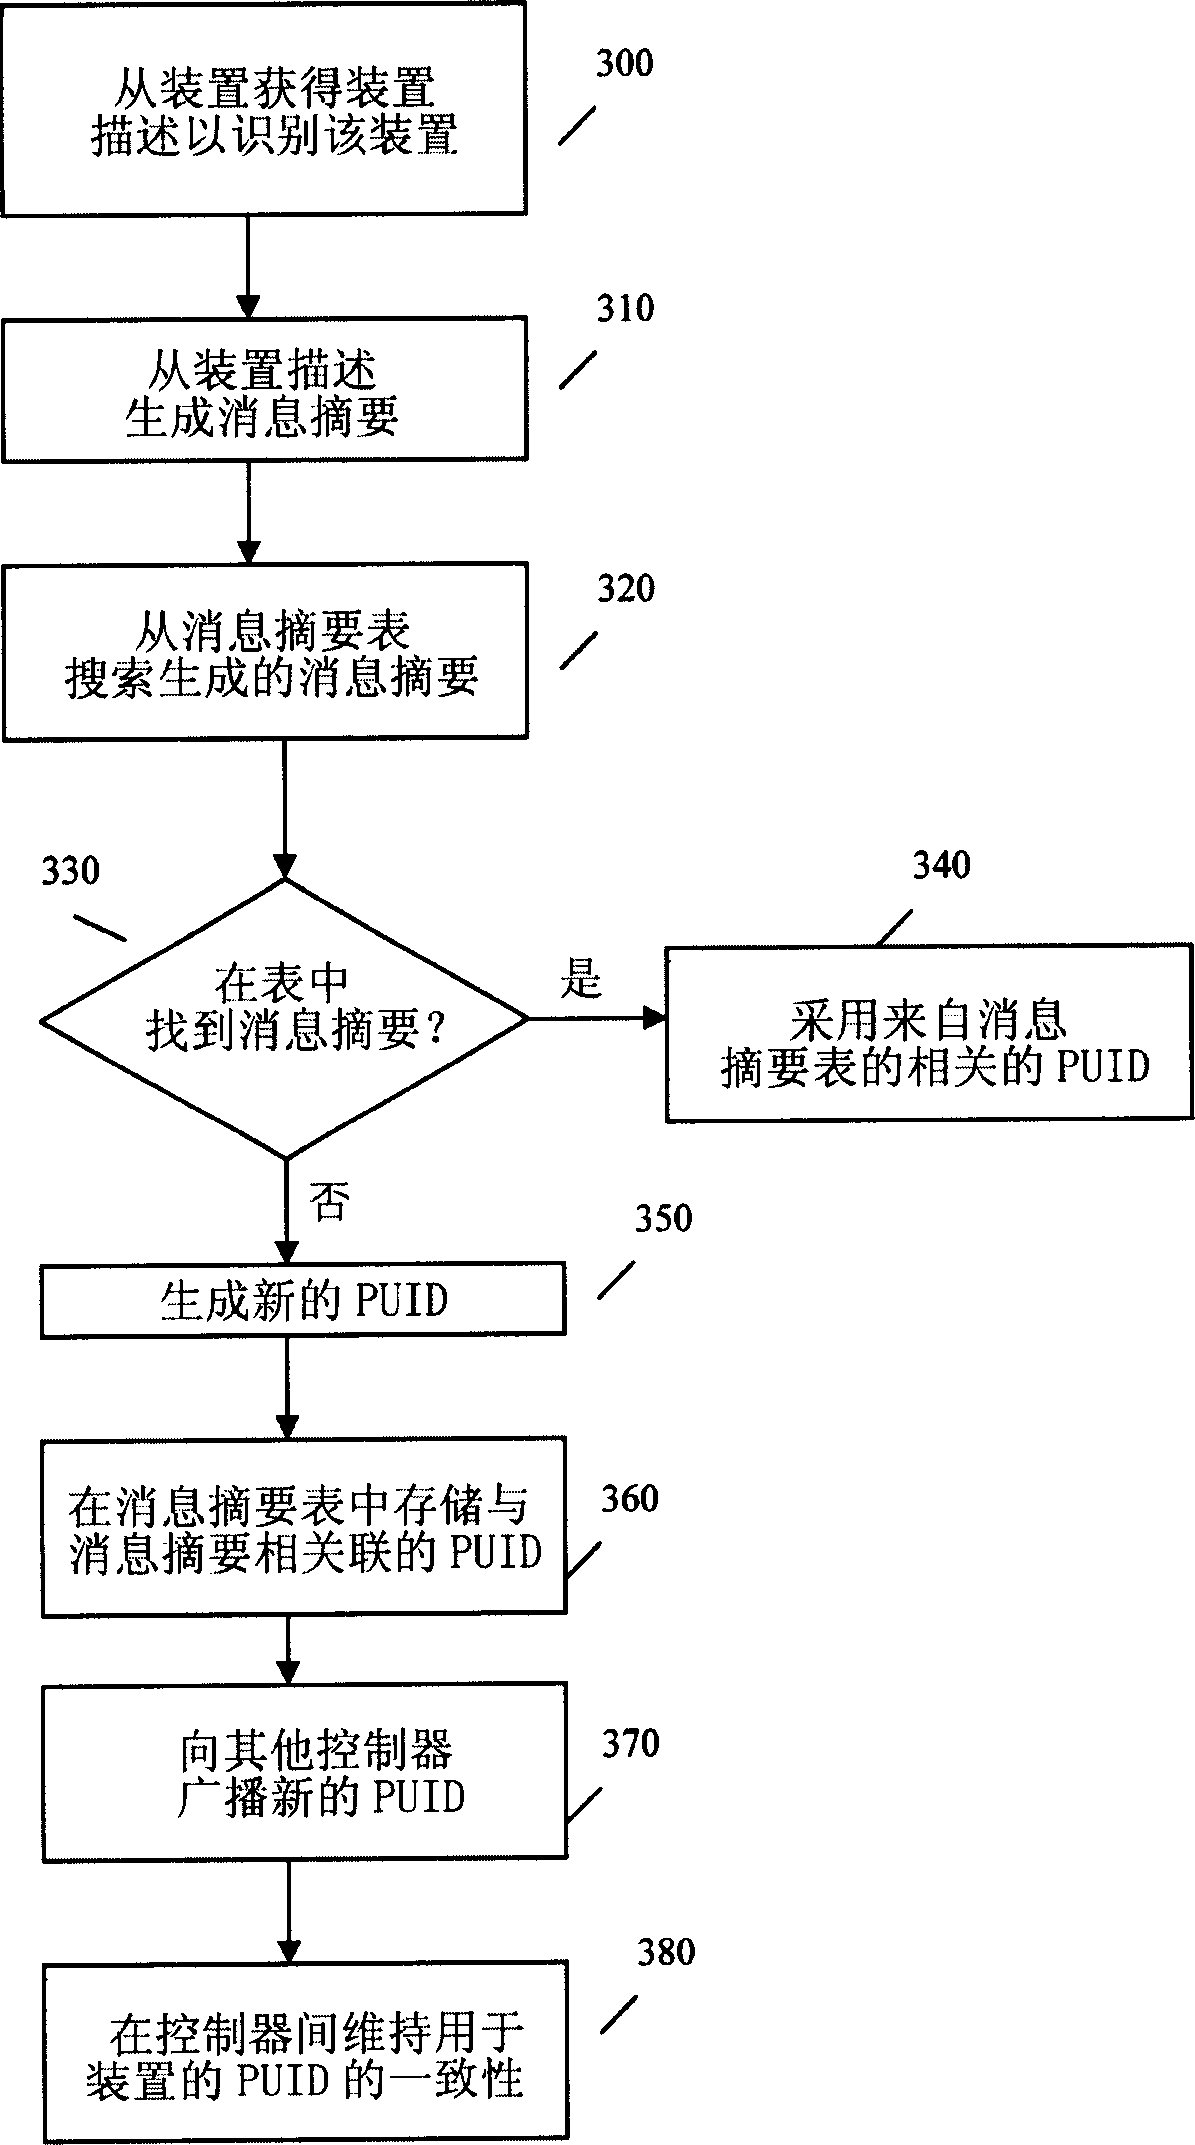 Method and system for maintaining persistent unique identifiers for devices in a network